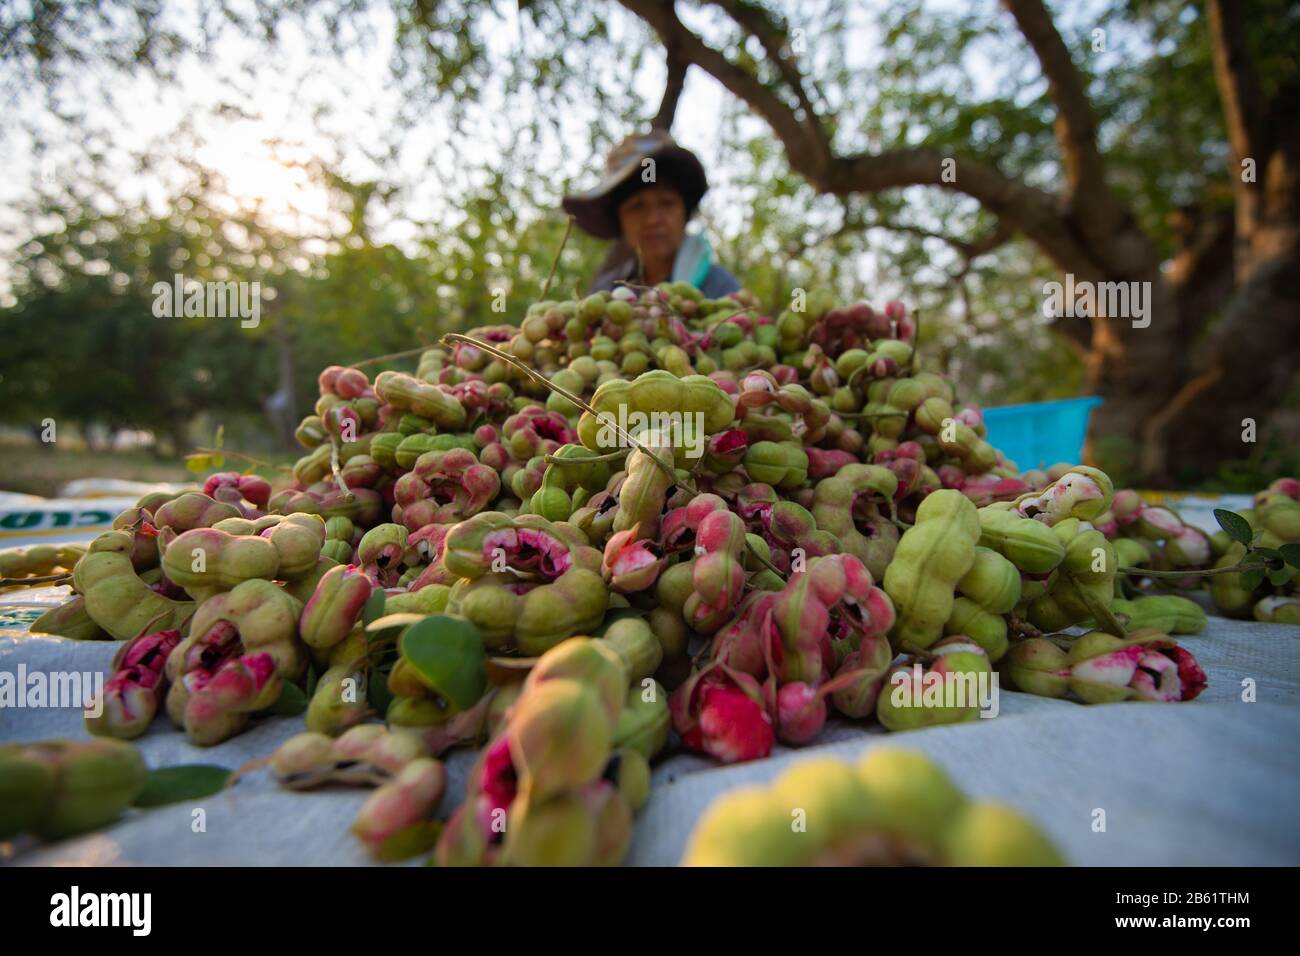 A farmer sorts harvested pithecellobium dulce fruits at their plantation in Ratchaburi.The harvest of the Pithecellobium dulce also known as Madras Thorn is from December to March. Stock Photo